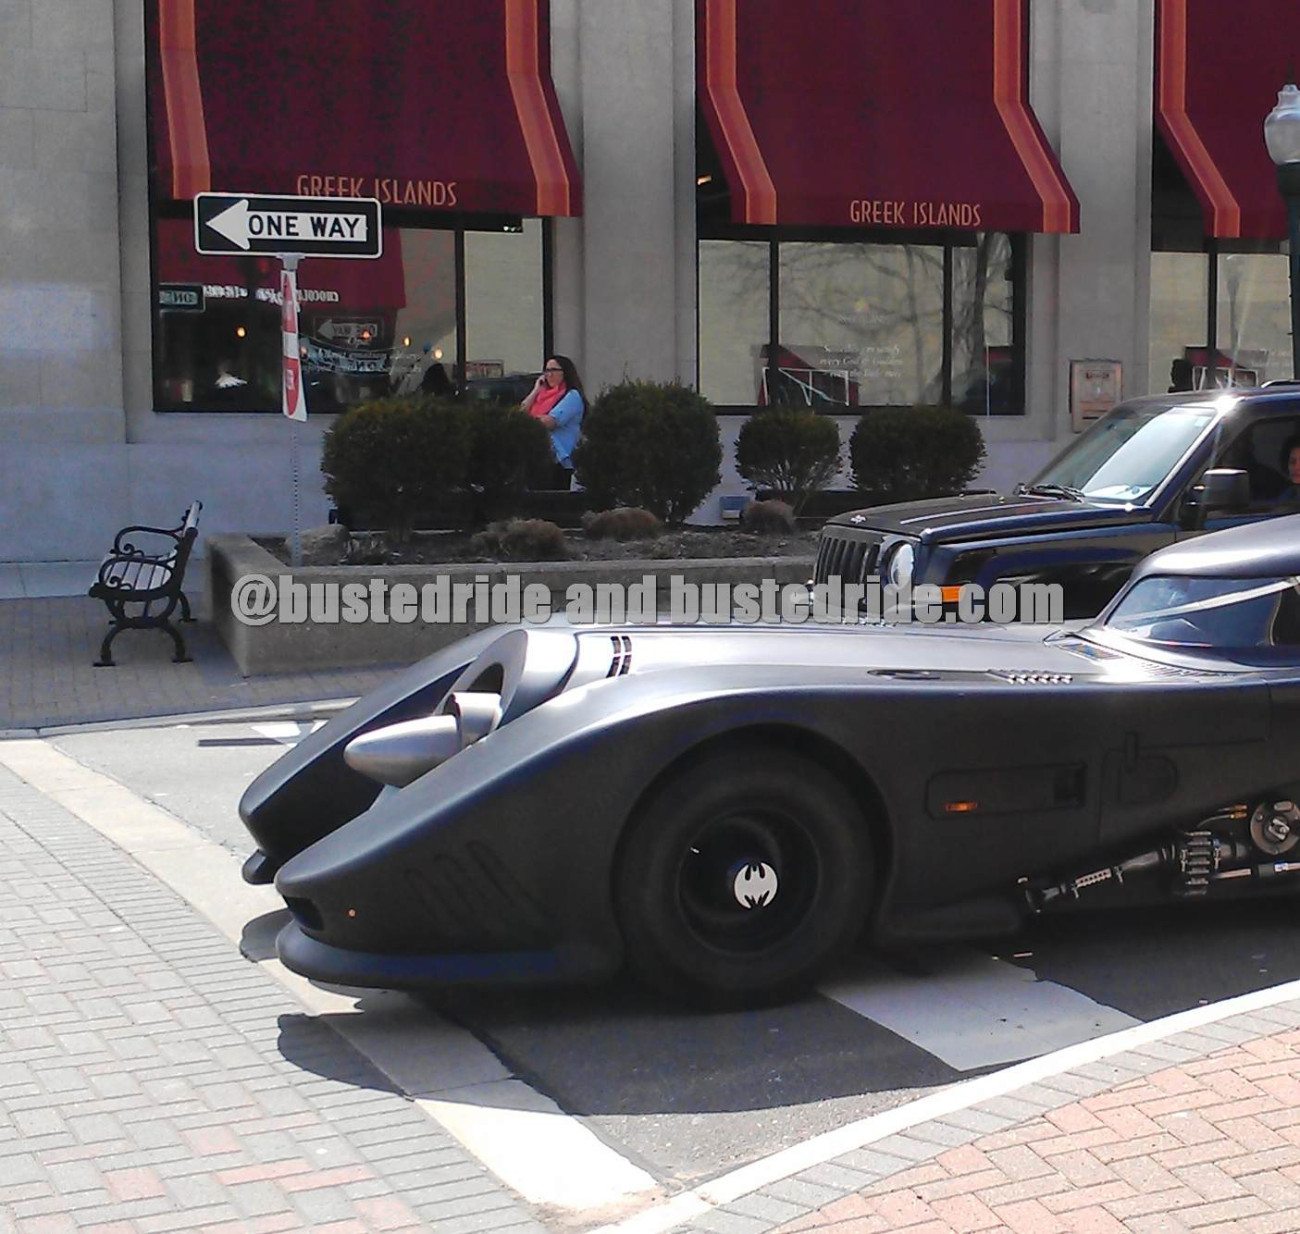 Batmobile - Vanity License Plate by Busted Ride